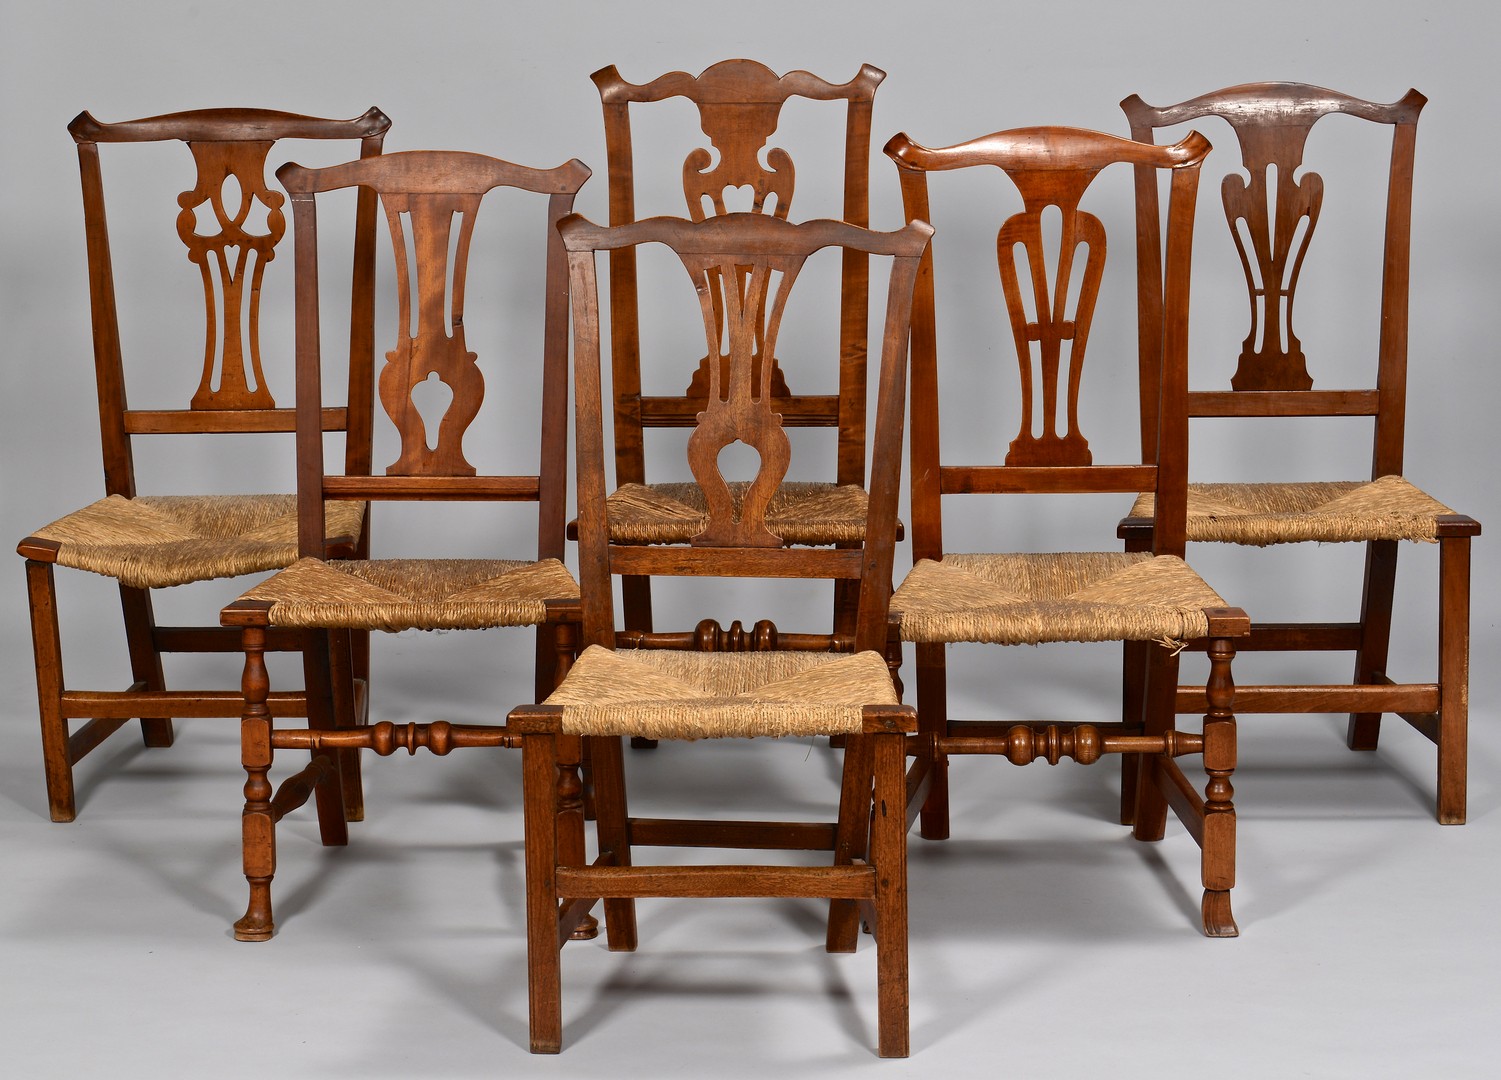 Lot 279: 6 Chippendale Country Side Chairs, 18th c.